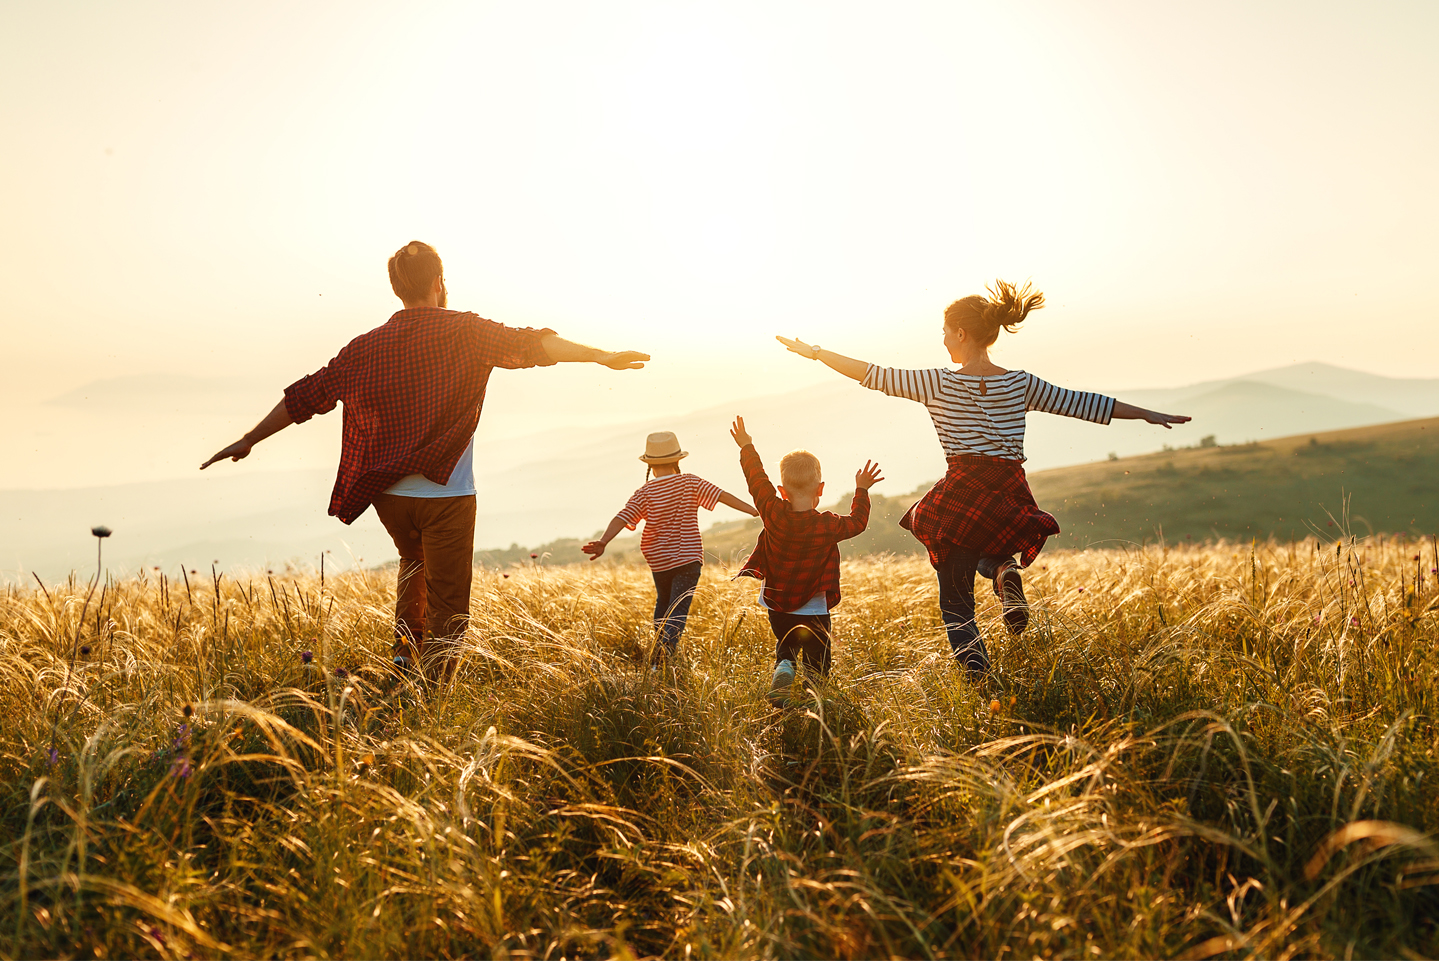 Image showing a happy family in nature at sunset